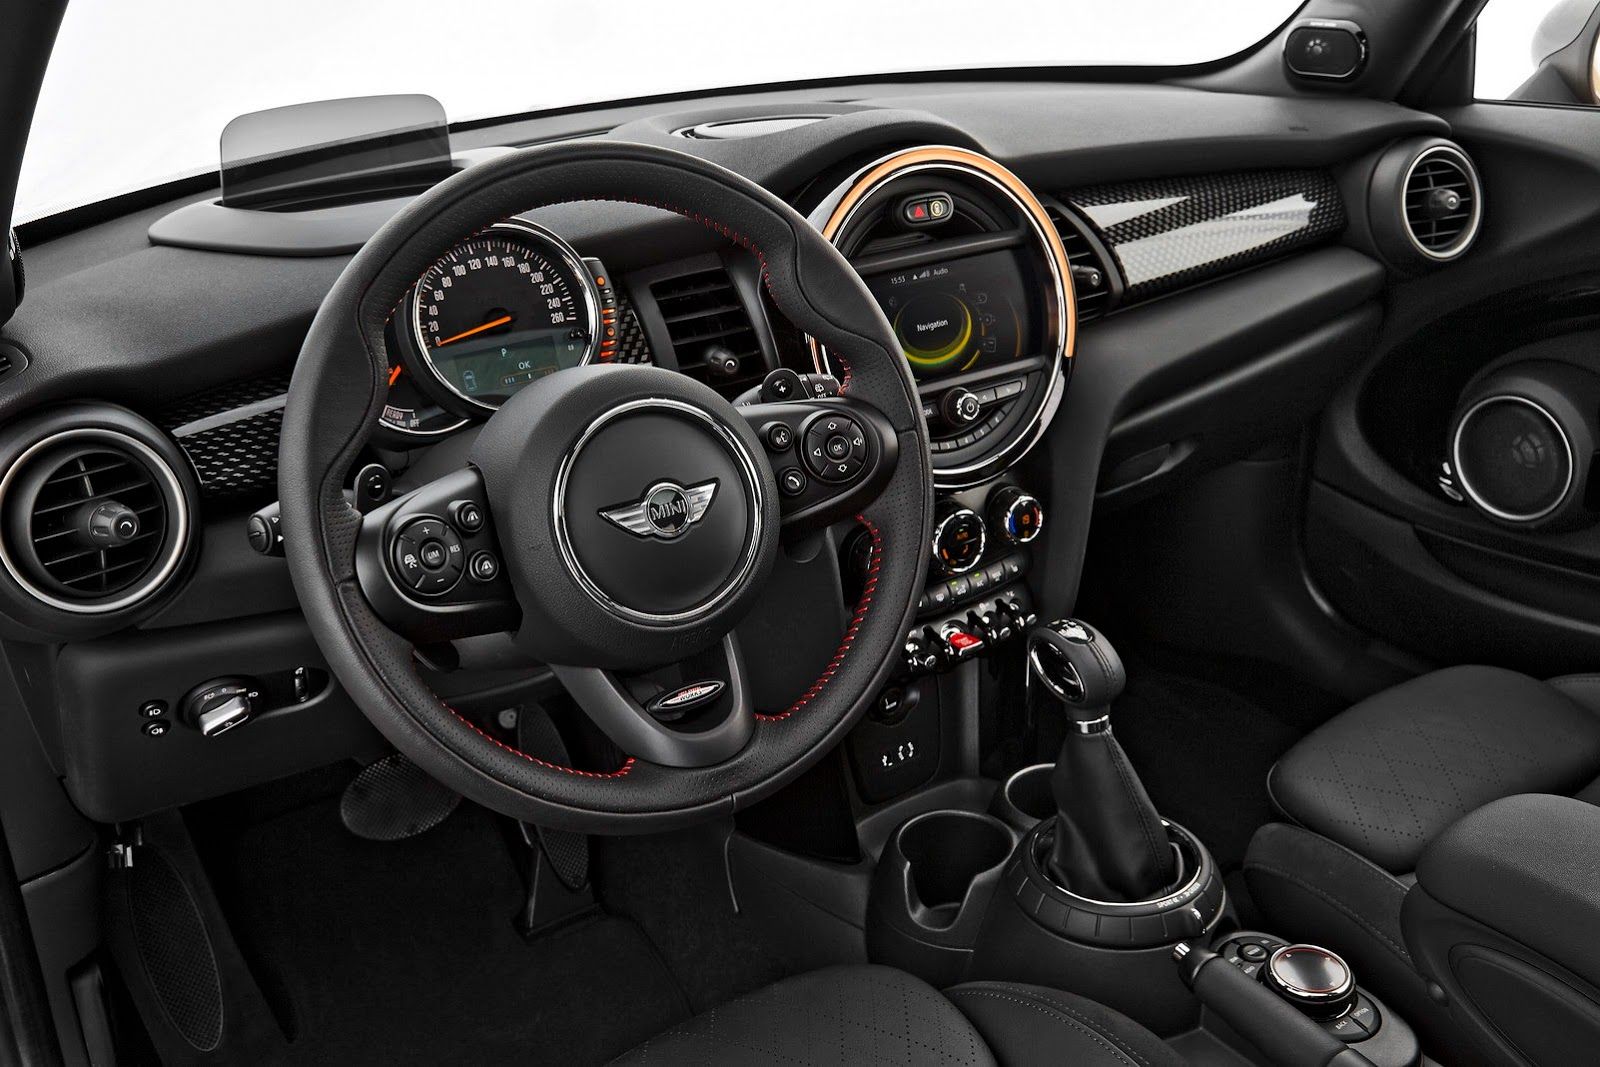 2015 MINI Hatches Out, Looks Familiar But is Bigger, Faster and More Frugal  [293 Photos] | Carscoops | Mini cooper interior, Mini cooper s, Mini cooper